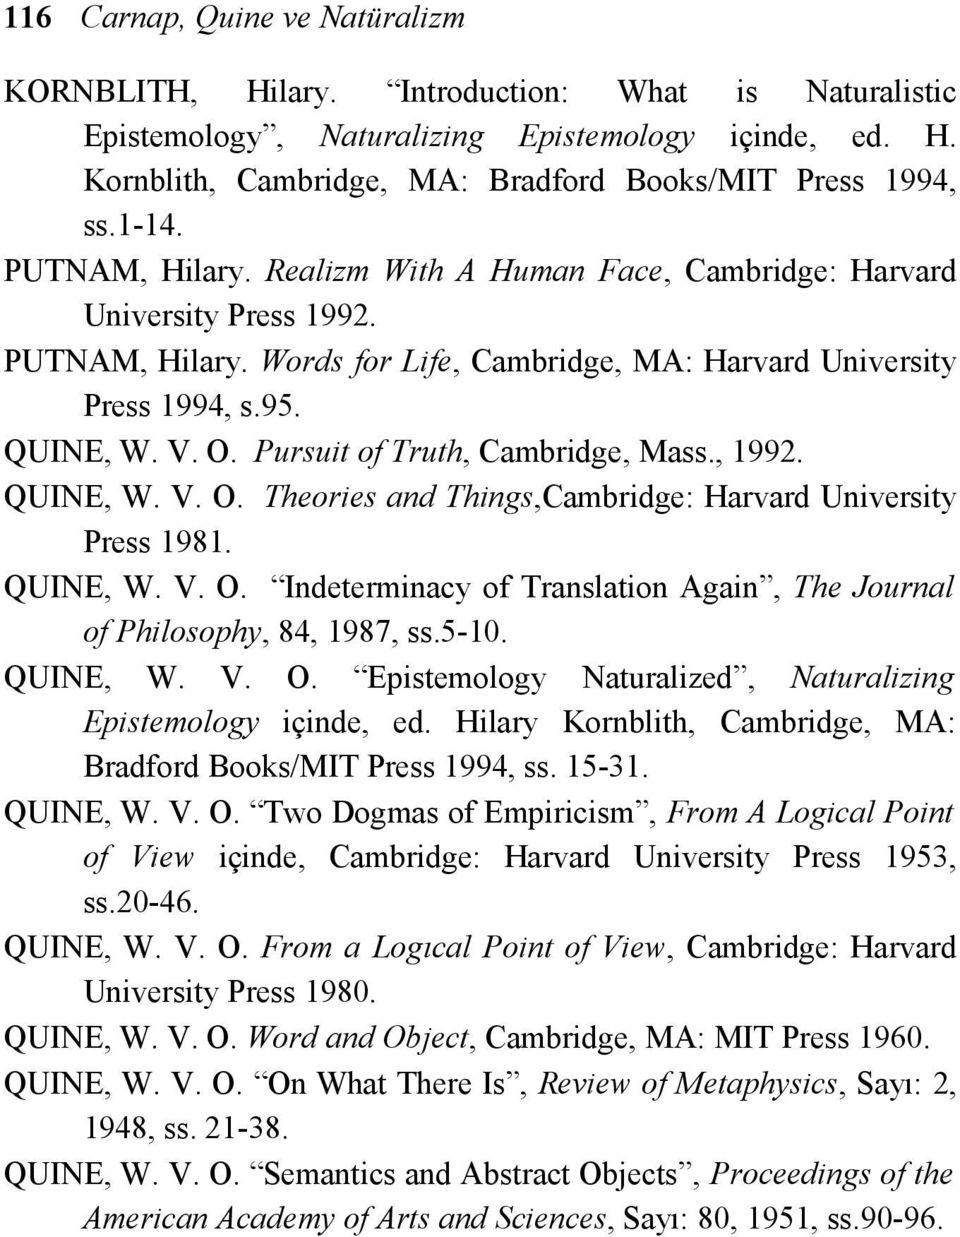 Pursuit of Truth, Cambridge, Mass., 1992. QUINE, W. V. O. Theories and Things,Cambridge: Harvard University Press 1981. QUINE, W. V. O. Indeterminacy of Translation Again, The Journal of Philosophy, 84, 1987, ss.